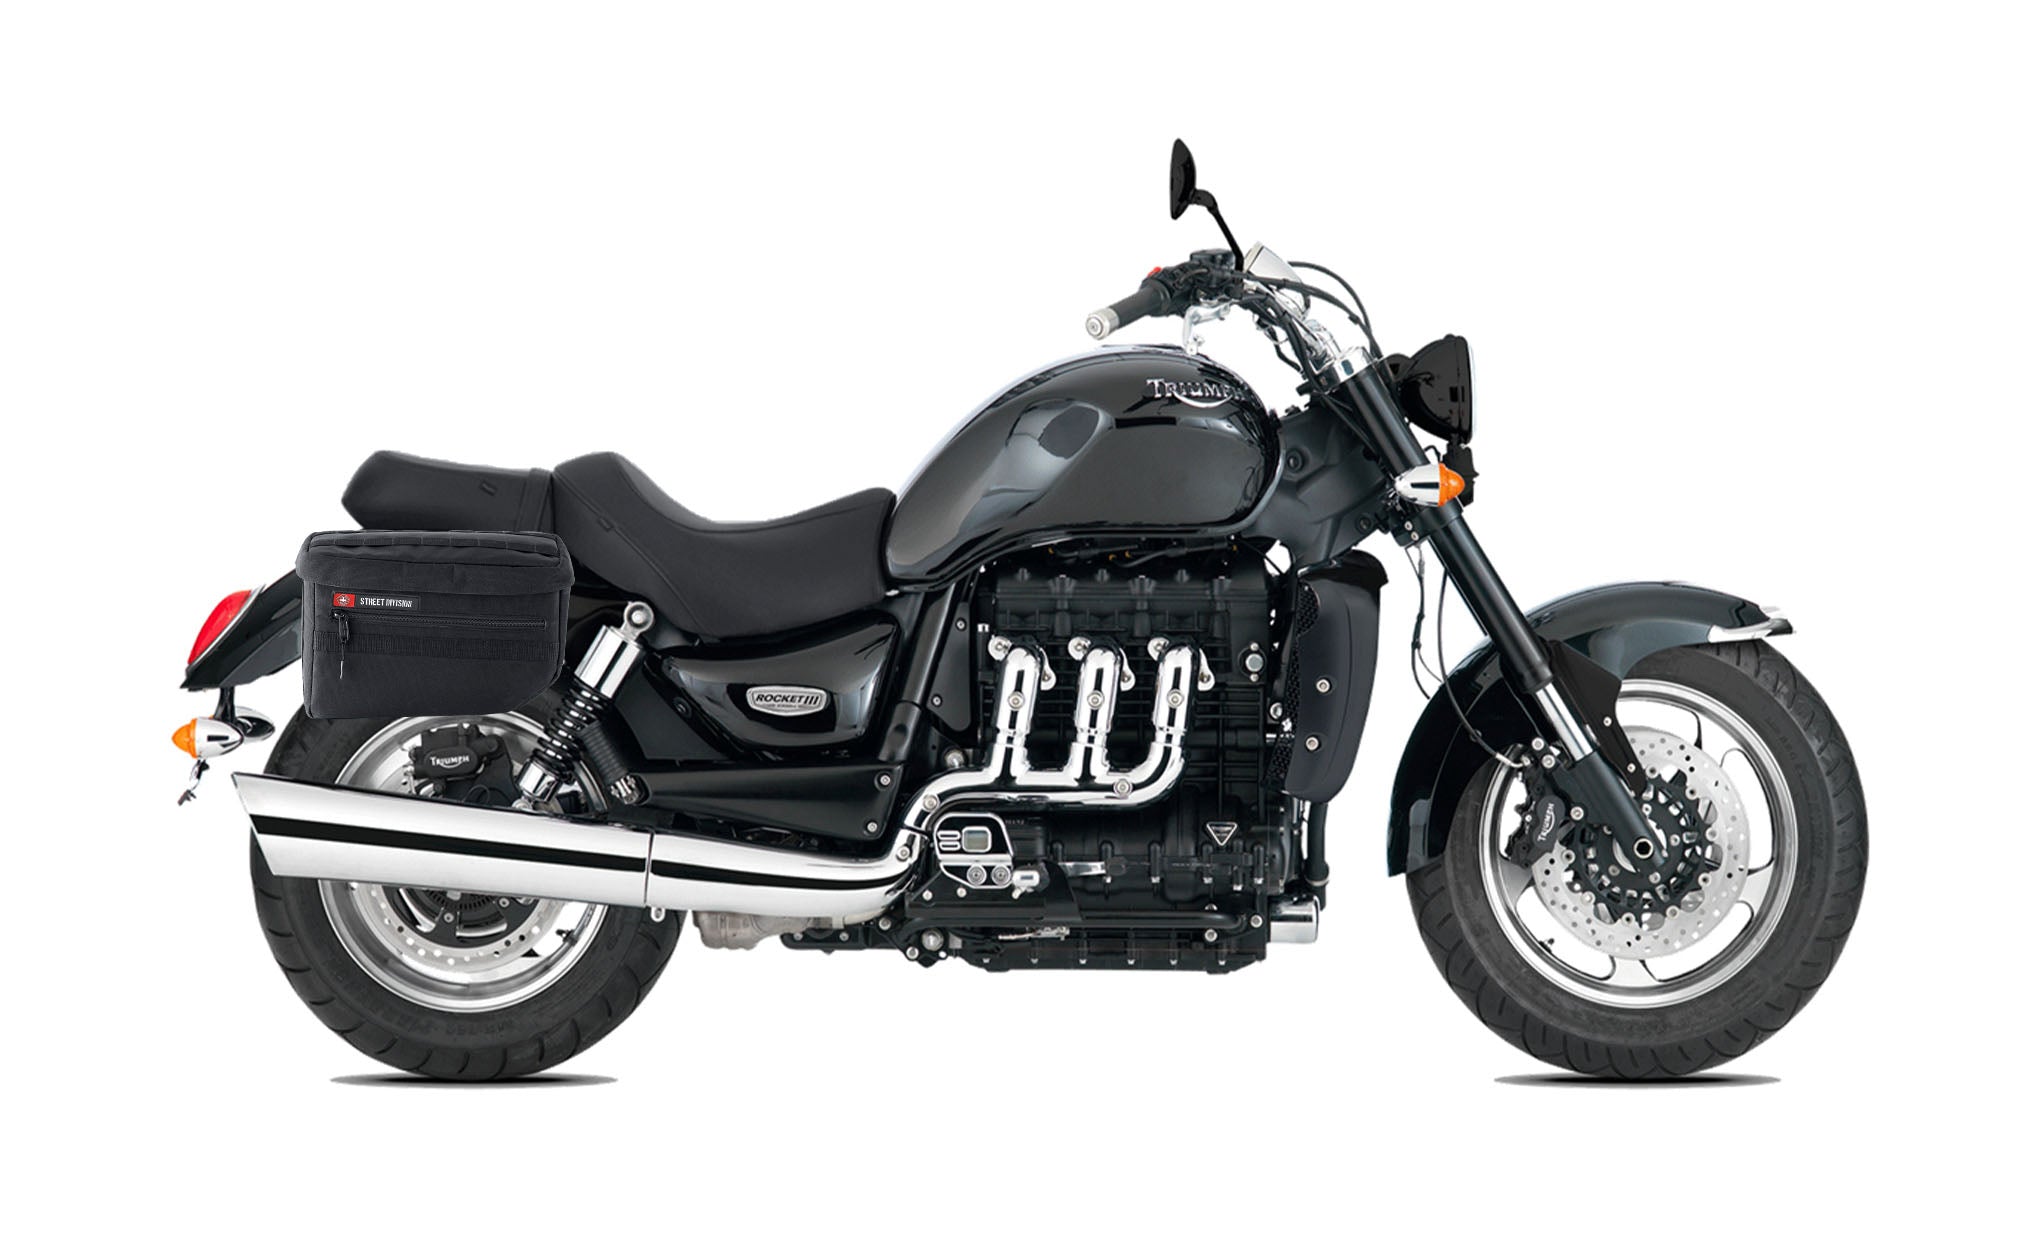 Viking Patriot Large Triumph Rocket Iii Roadster Motorcycle Throw Over Saddlebags on Bike Photo @expand